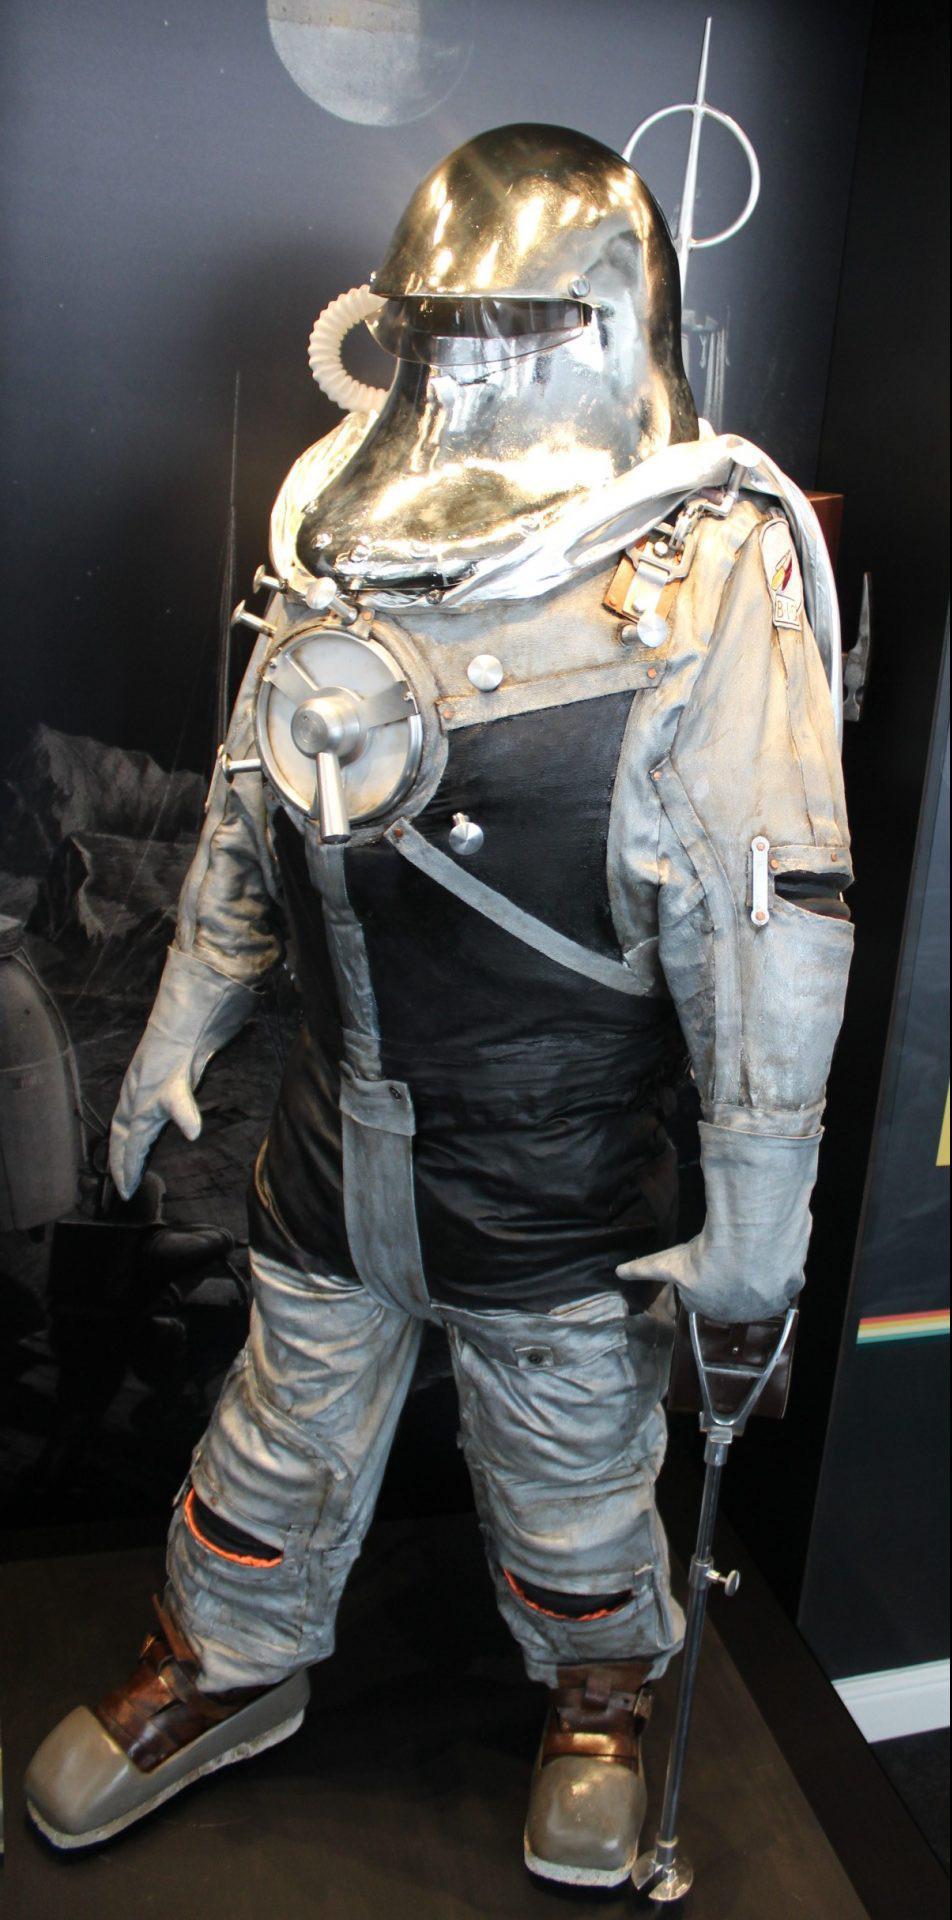 This space suit designed by the British Interplanetary Society in 1949. Neil and Buzz would walk on the moon 20 years later.jpg